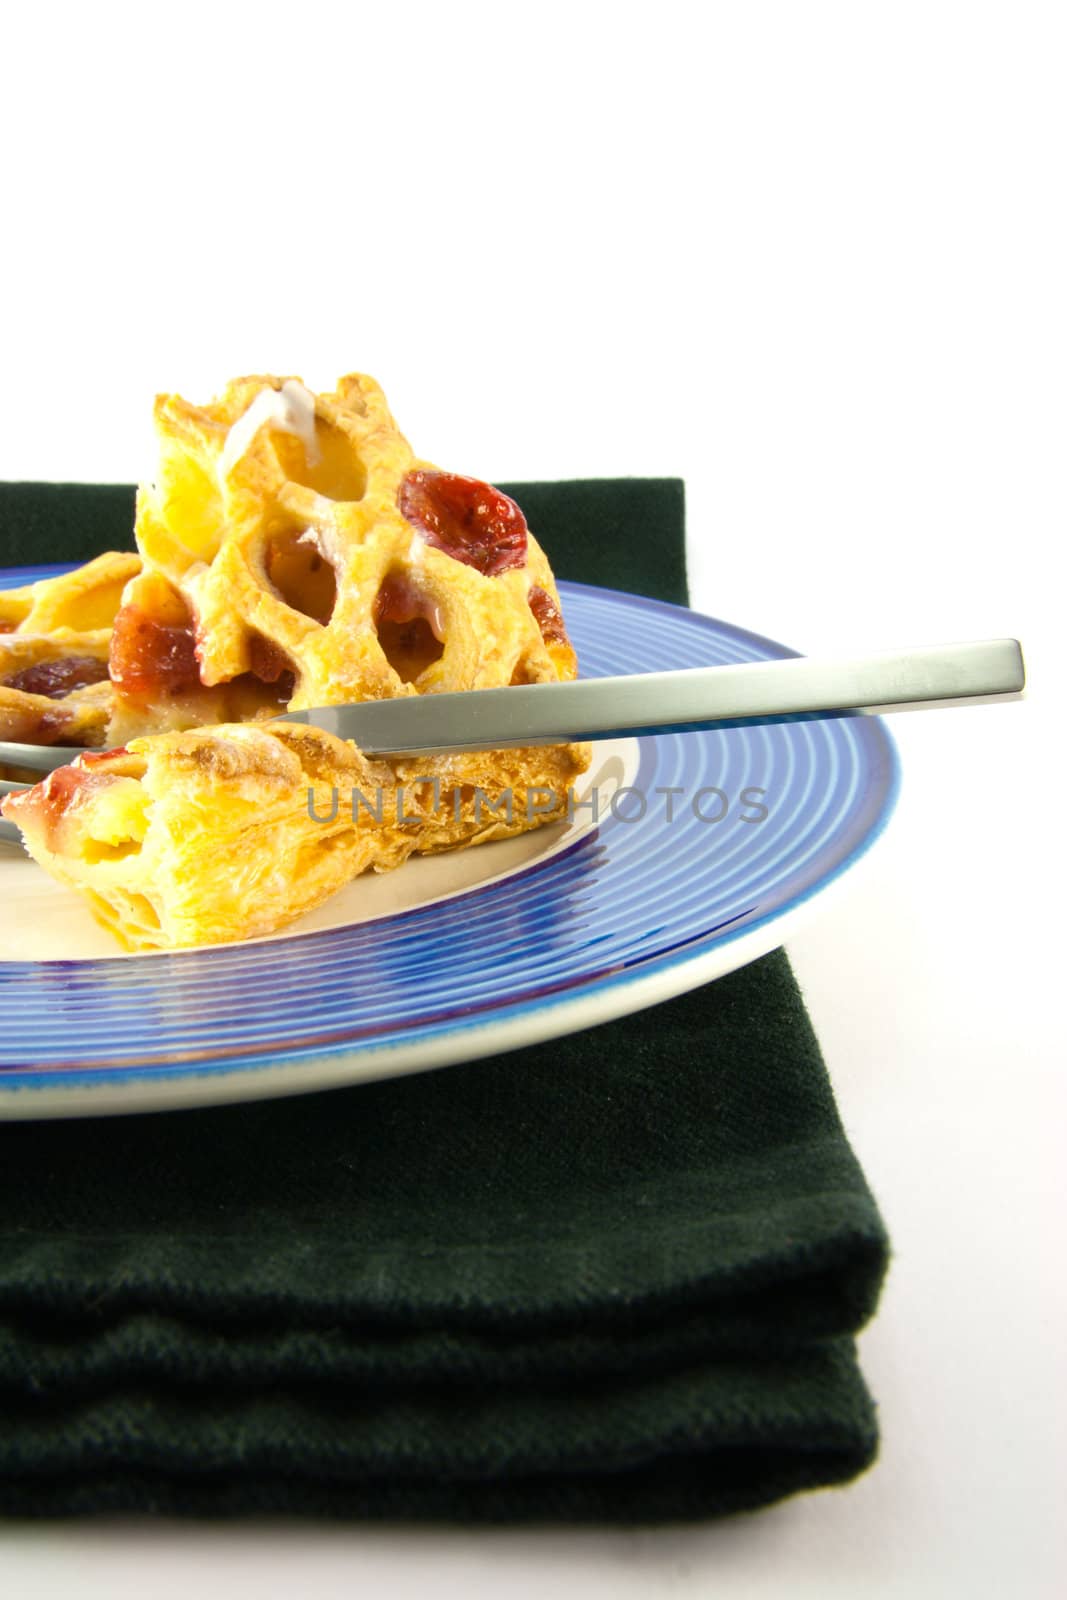 Raspberry and custard danish on a blue and white plate with a fork and black napkin on a white background